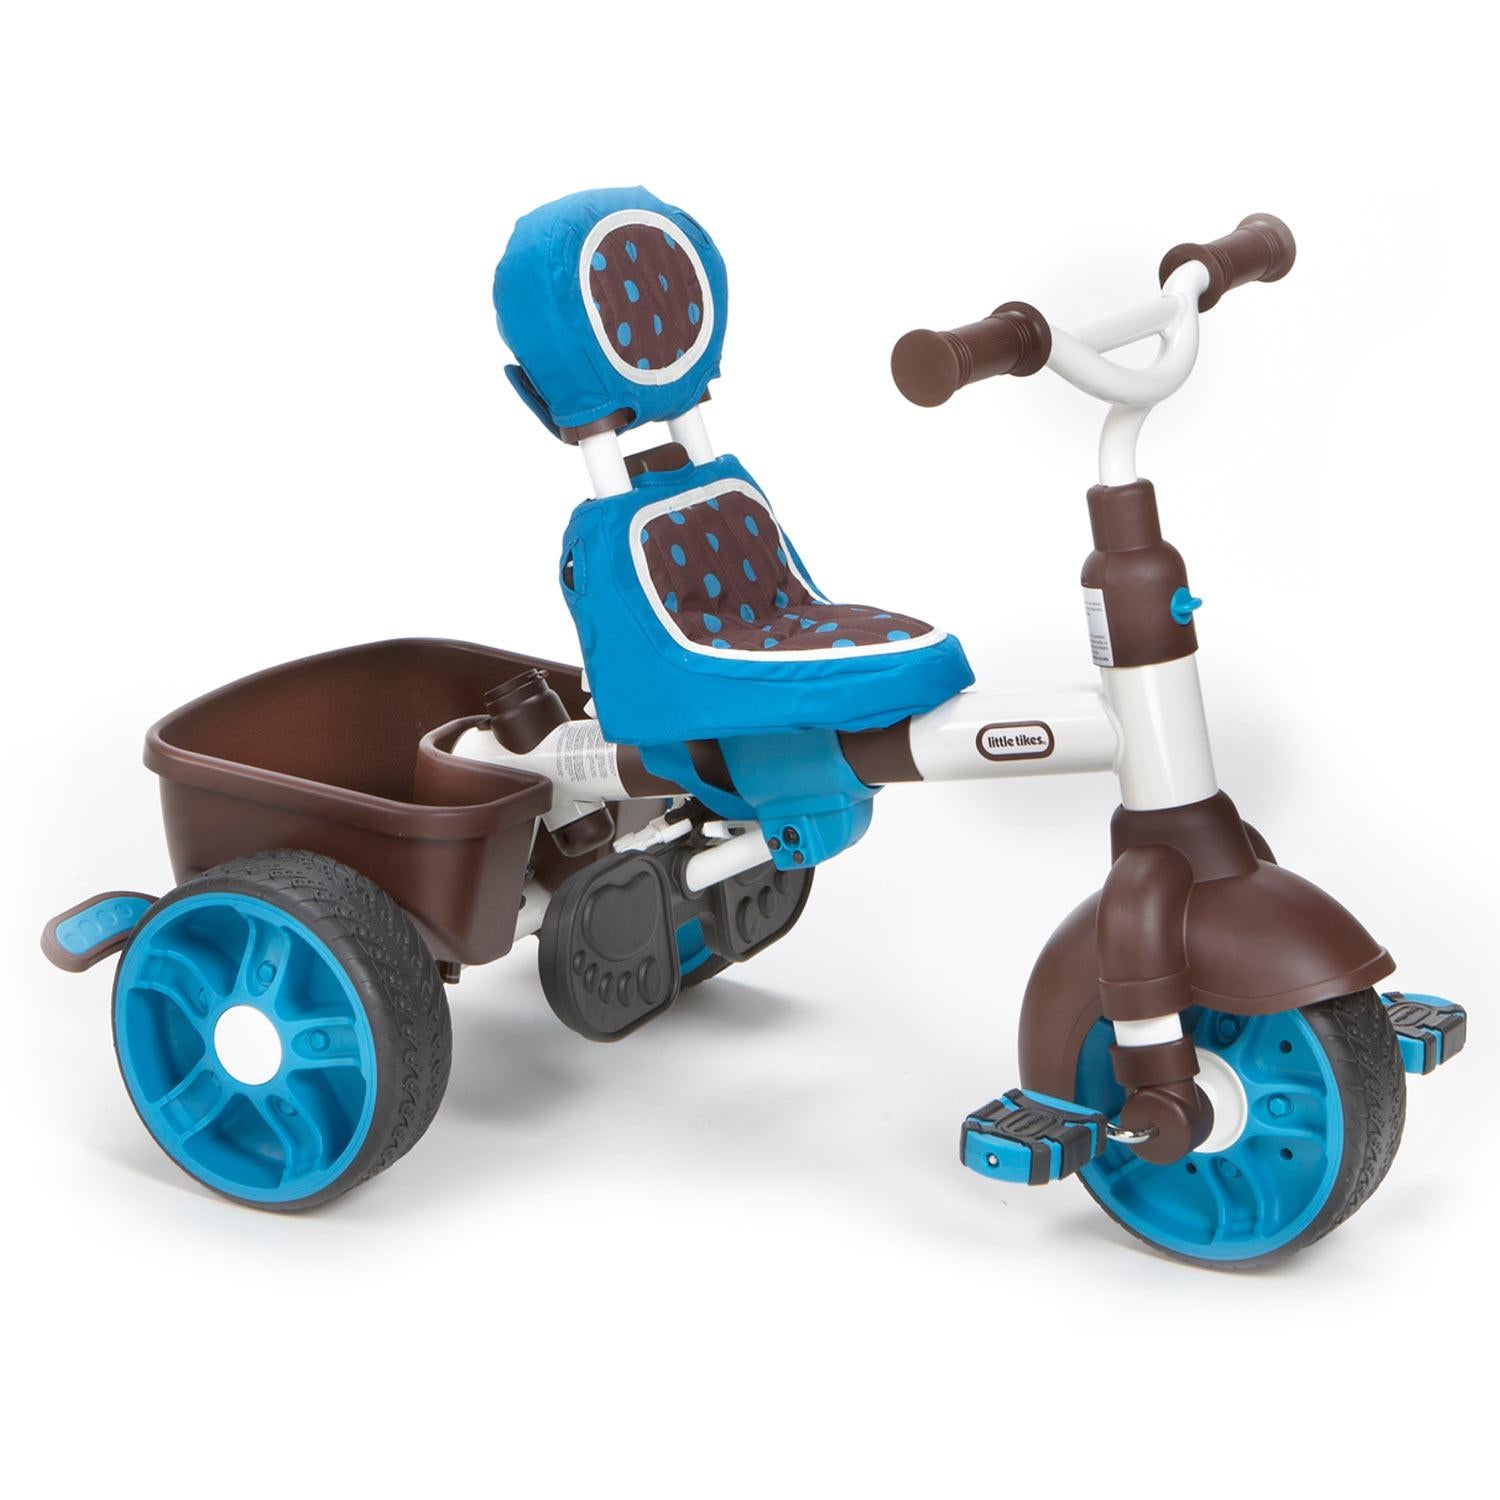 Tikes Website | – Trike Little Blue 4-in-1 - Sports Tikes Editon Official Little